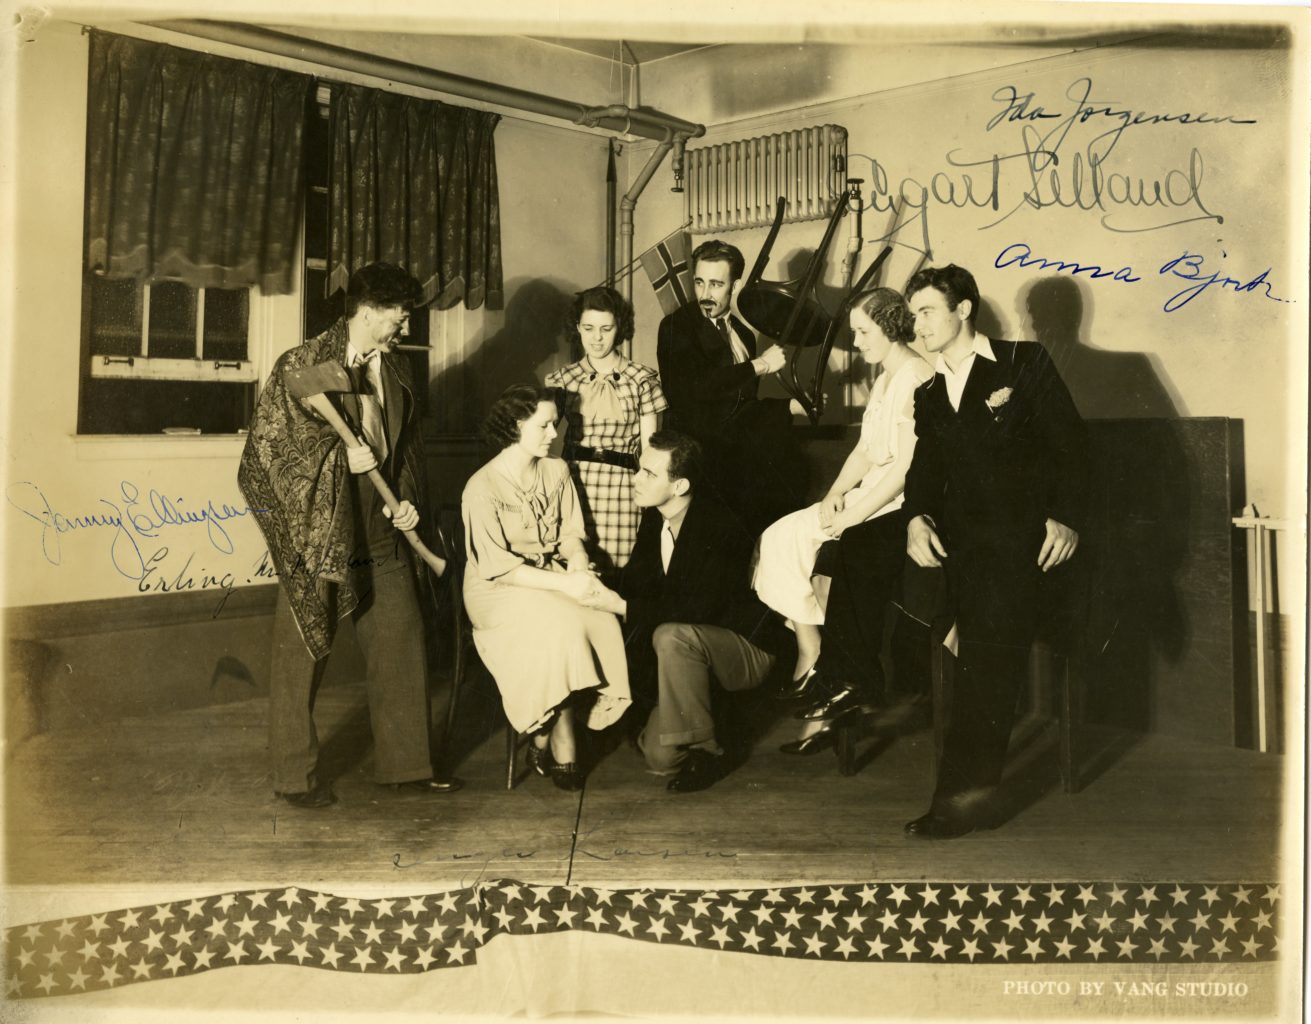 Seven individuals dressed up to act.